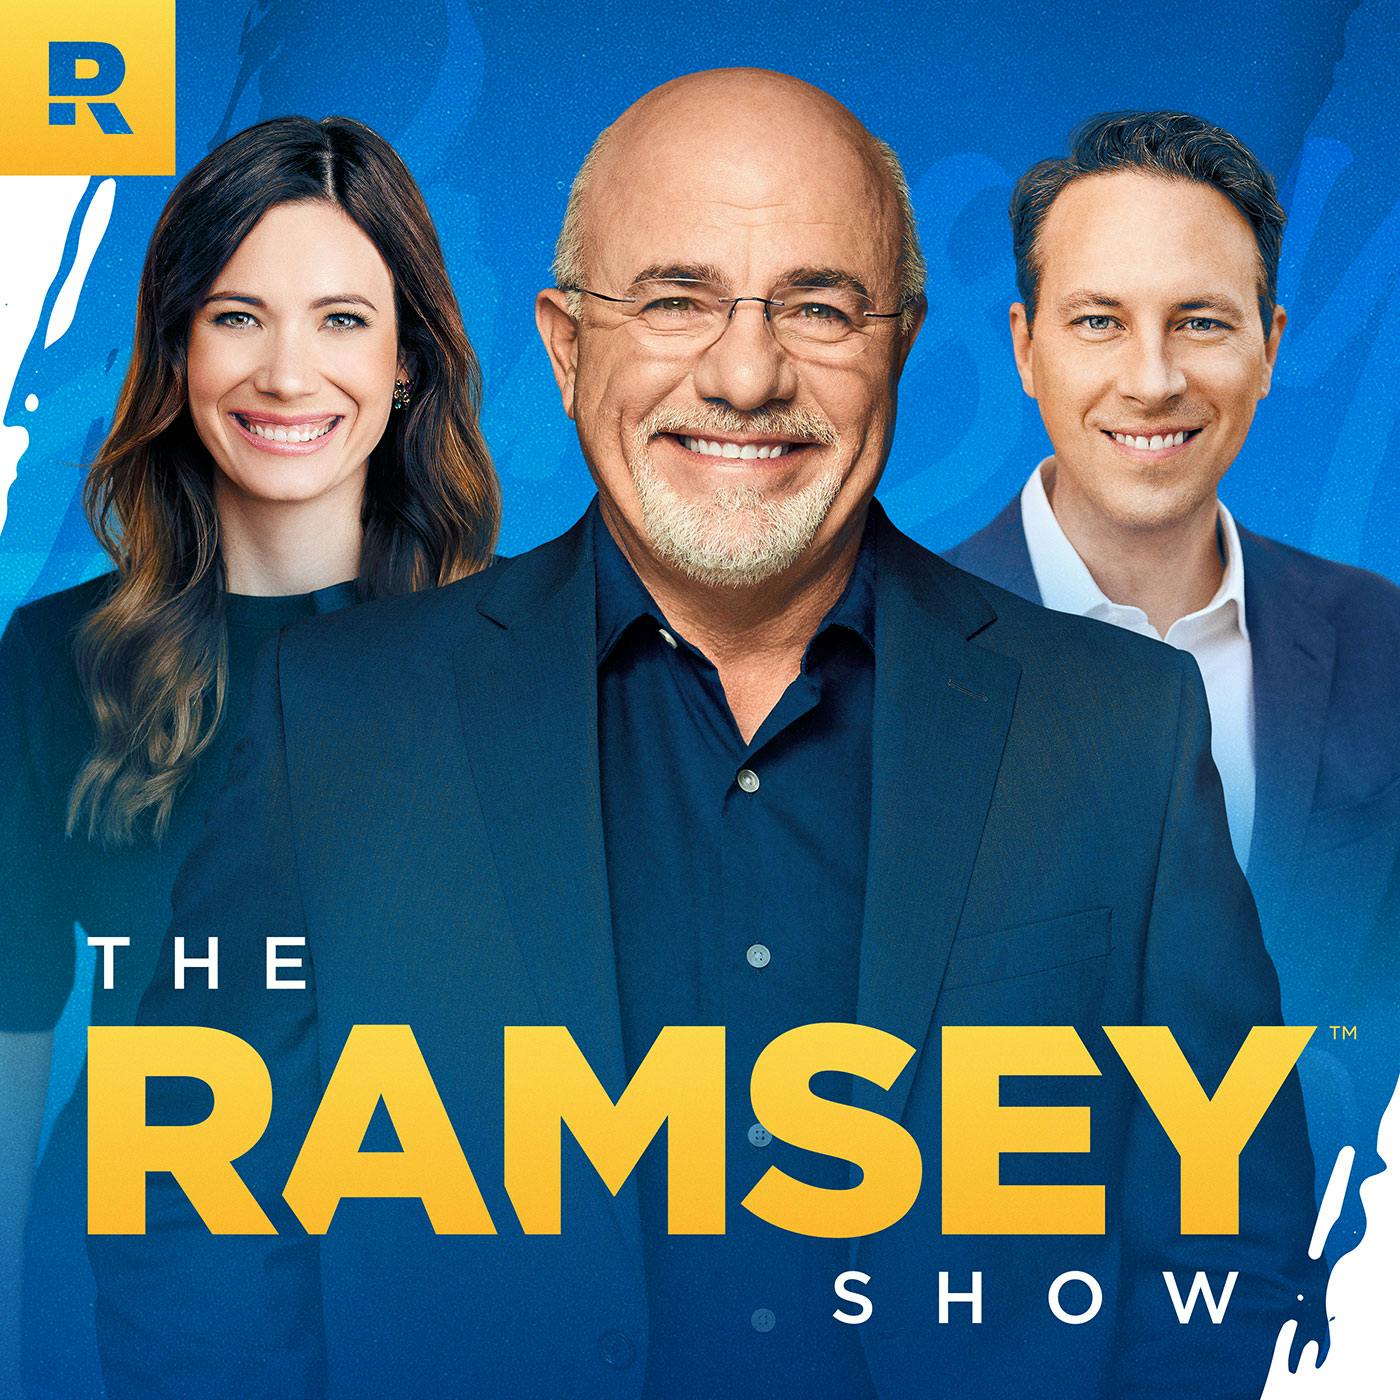 The Ramsey Show podcast show image